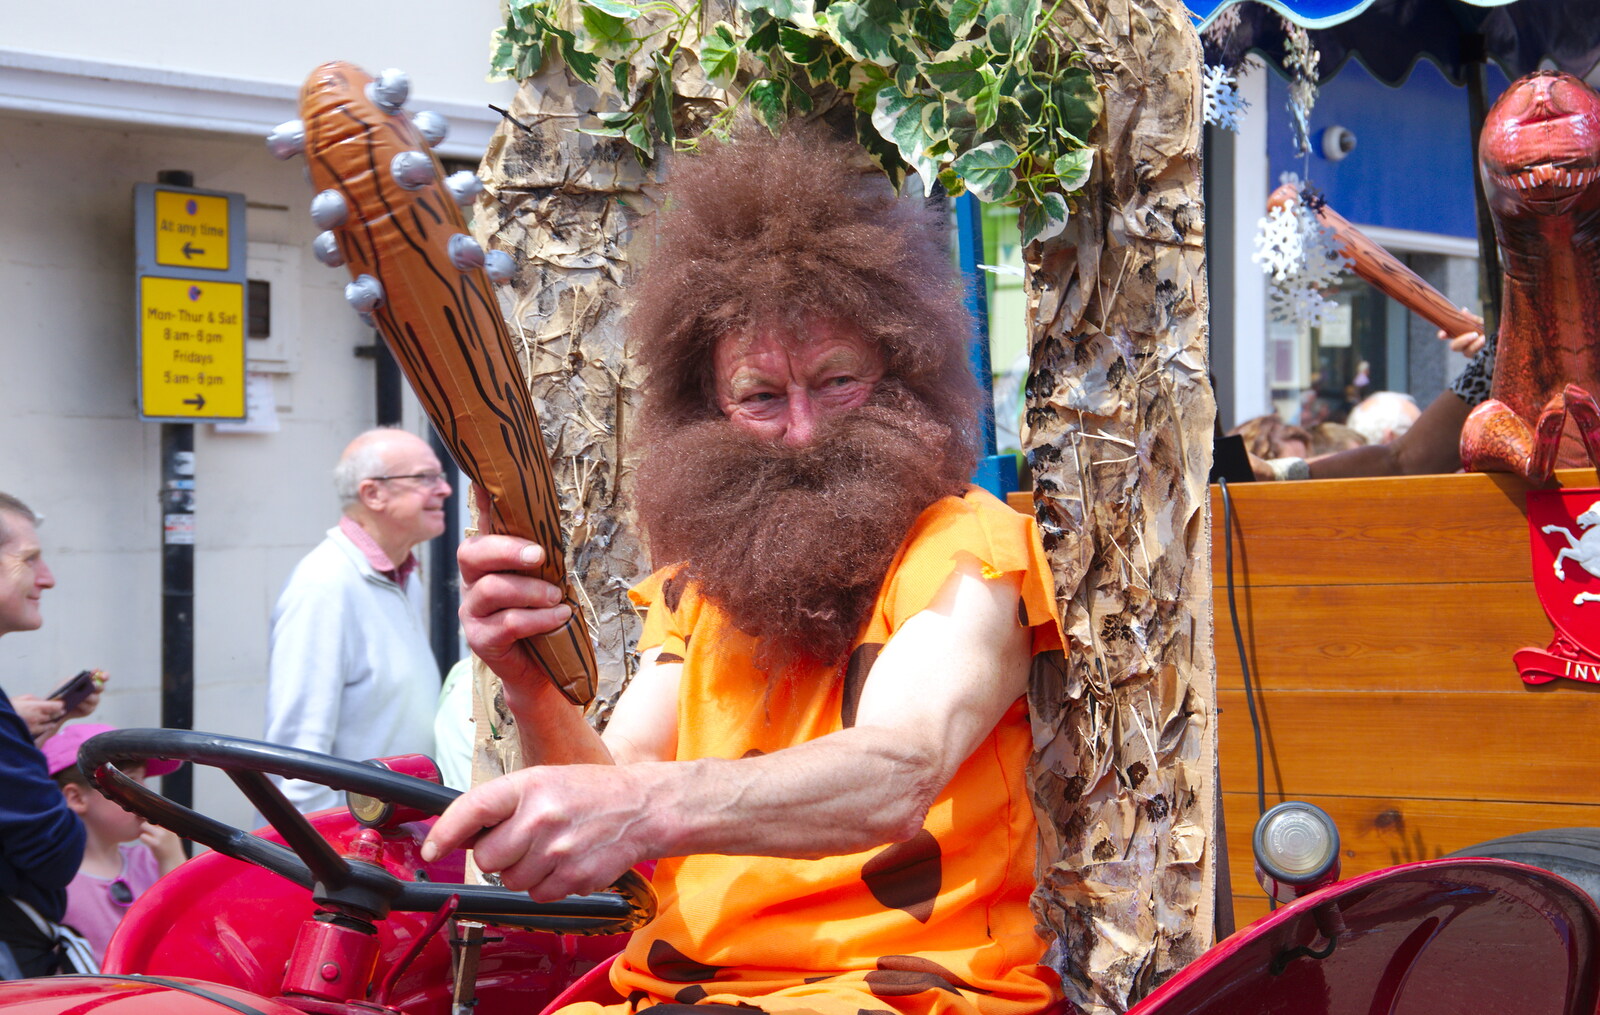 A fake beard looks almost real from The Diss Carnival 2019, Diss, Norfolk - 9th June 2019